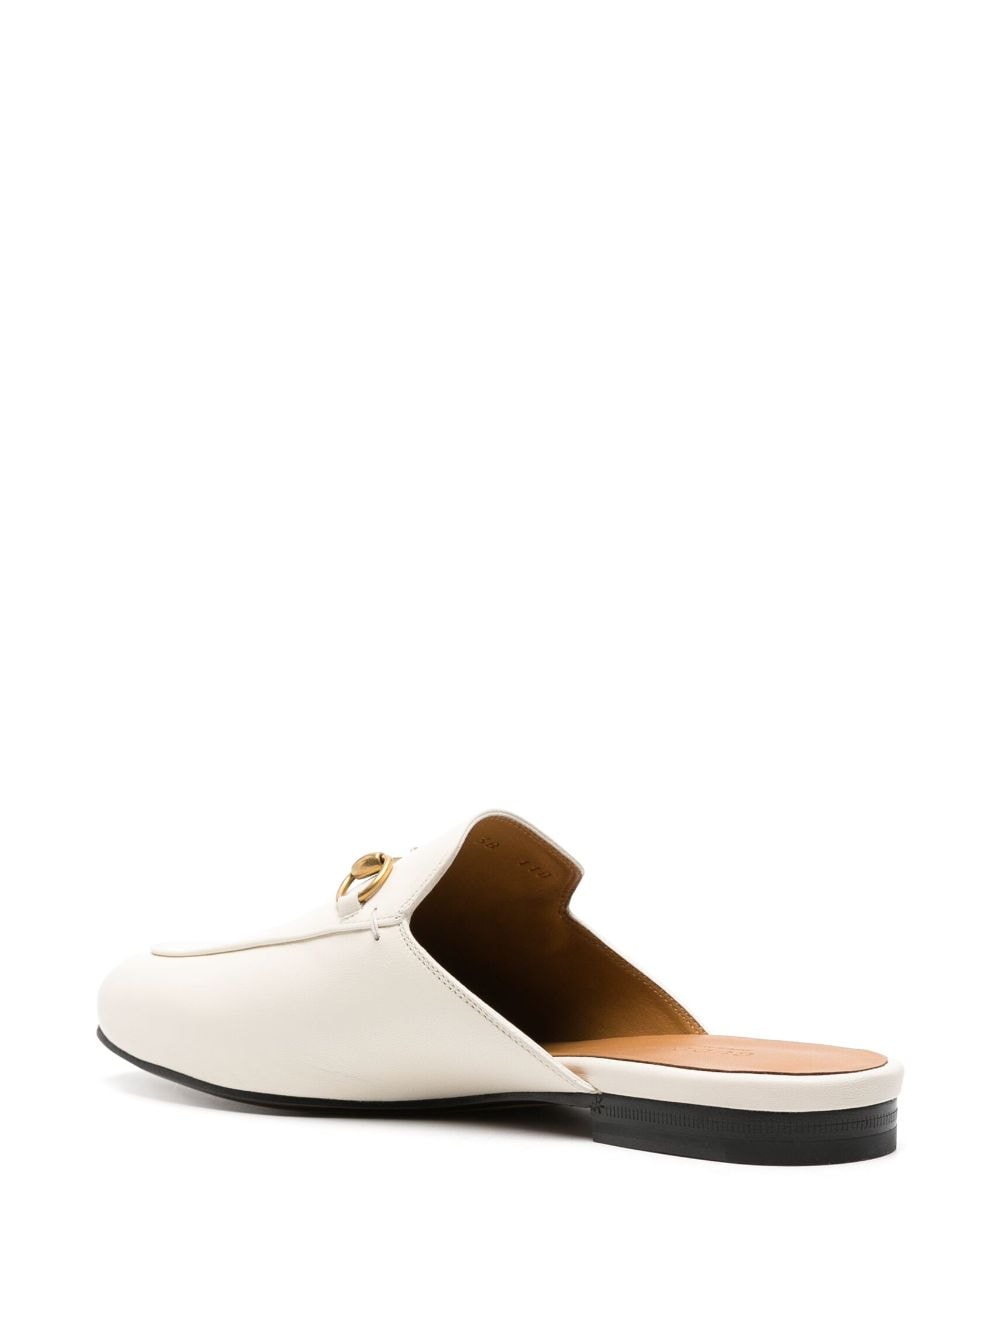  Gucci Princetown Leather Mules - White 